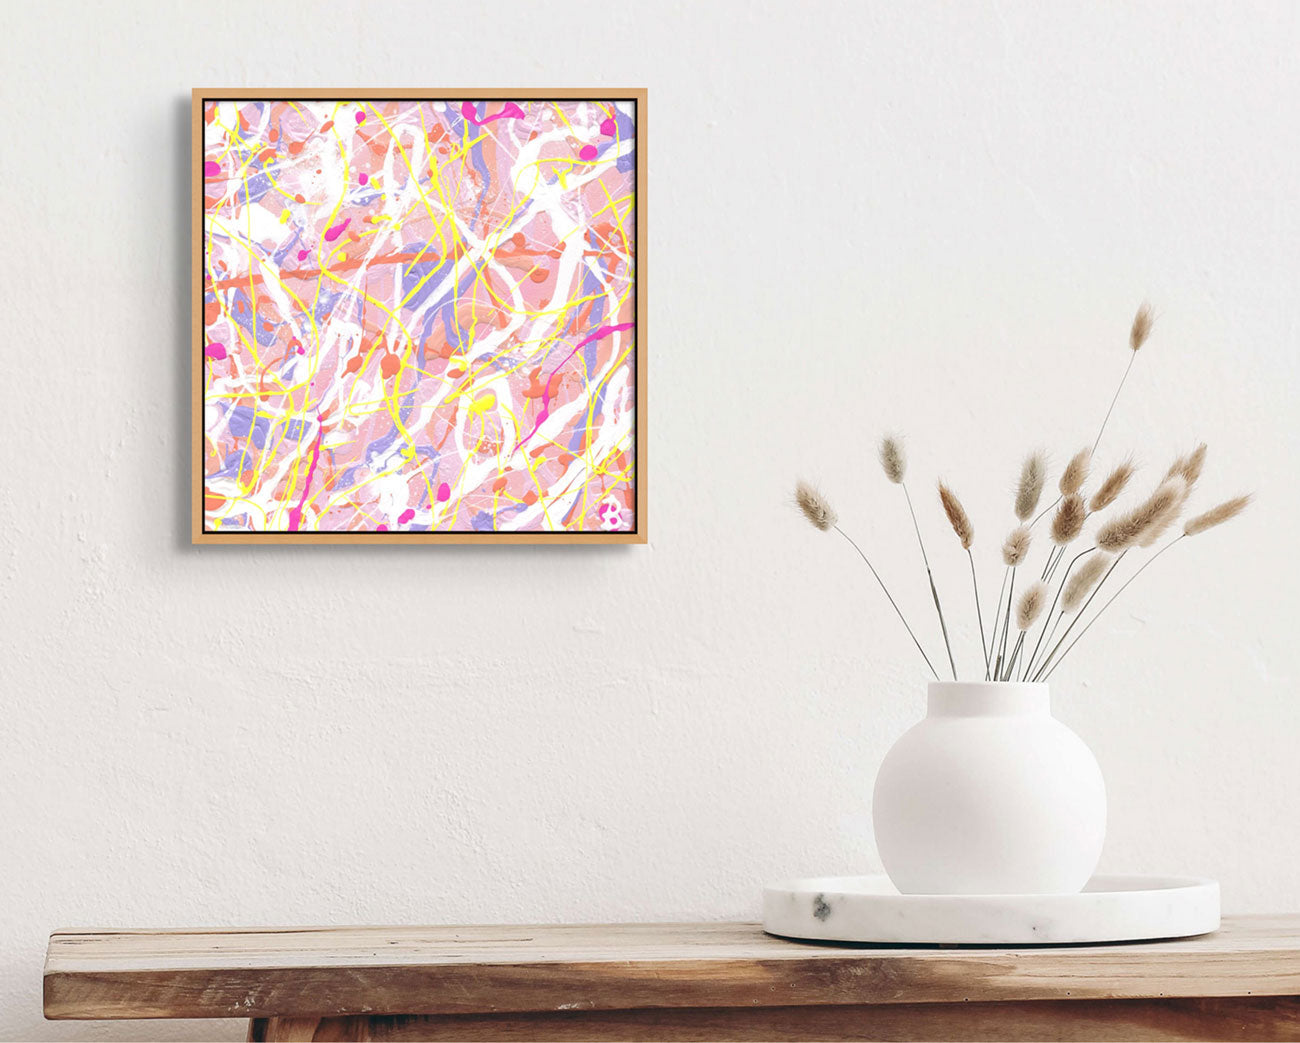 'Cupcake II' one of threee beautiful modern abstract paintings, hand painted by Bridget Bradley. Seen here if framed in oak above white vsae and tray on wooden table. Learn more about this one of a kind abstract original painting.